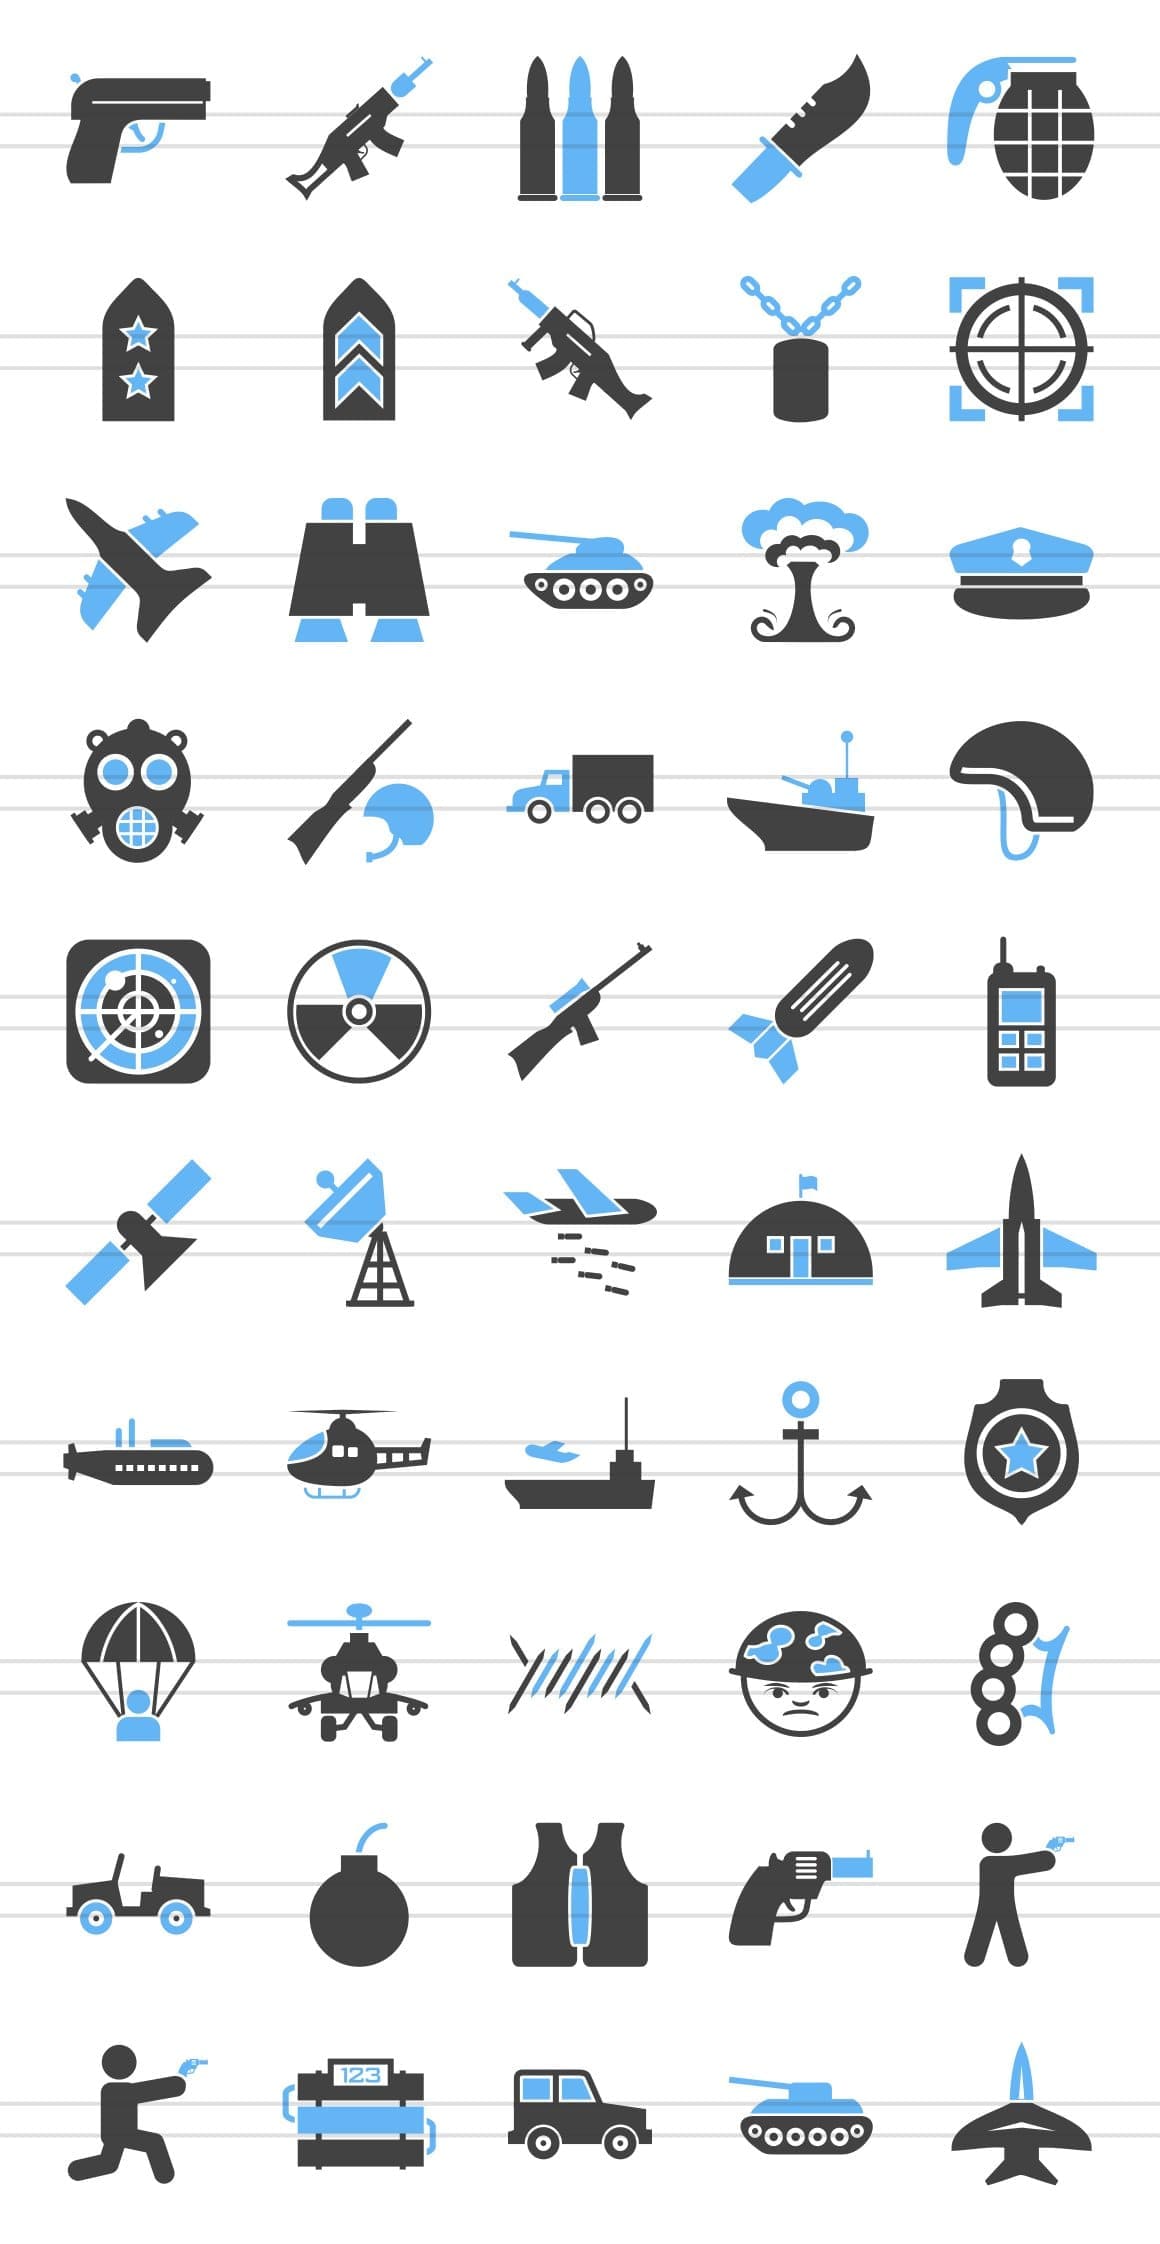 Explosions, rockets, boats in blue and black on a white background.